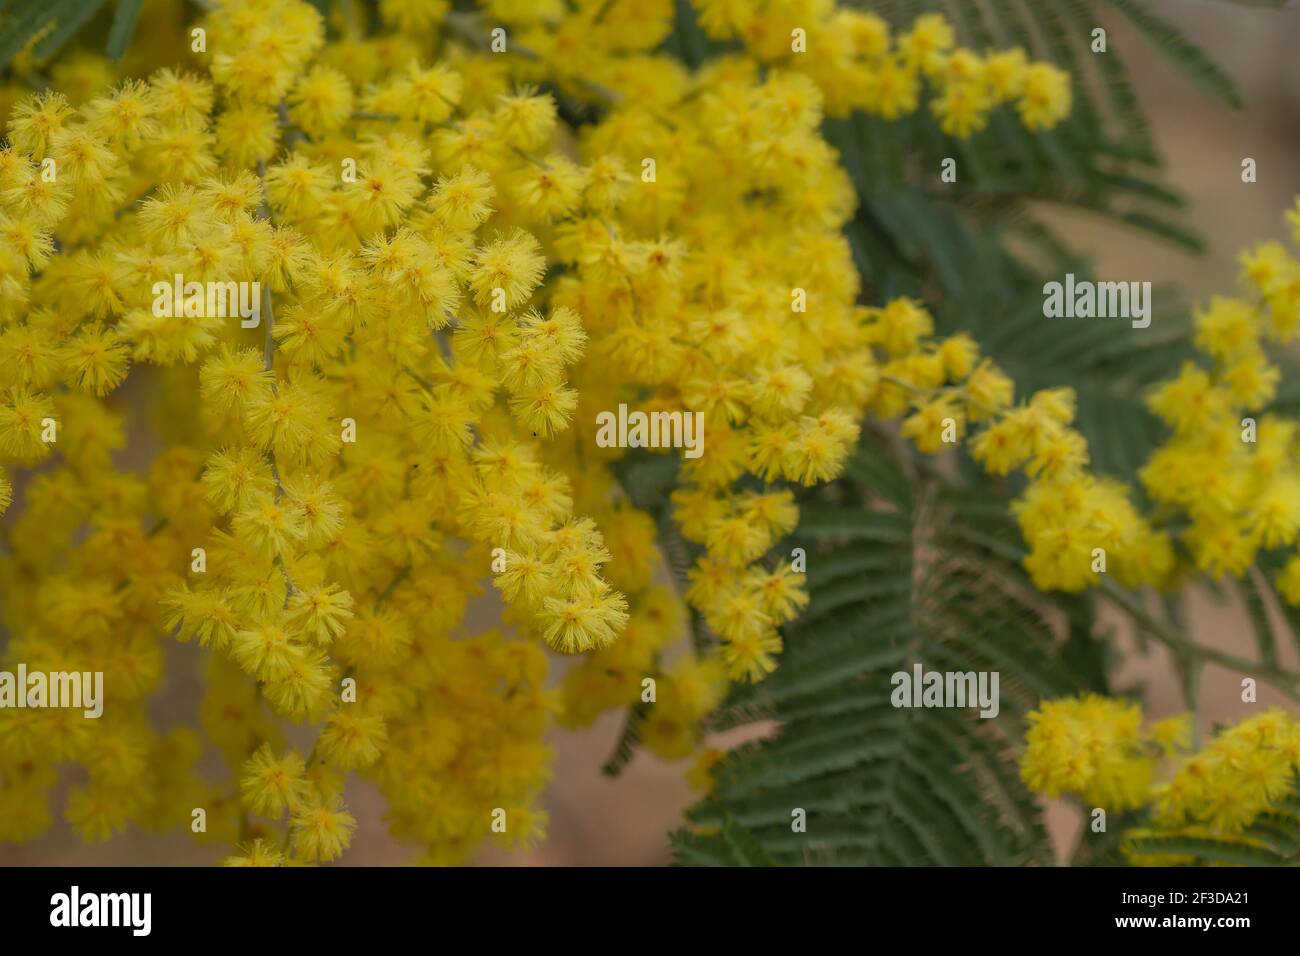 Silver wattle yellow flowers blooming in spring Stock Photo